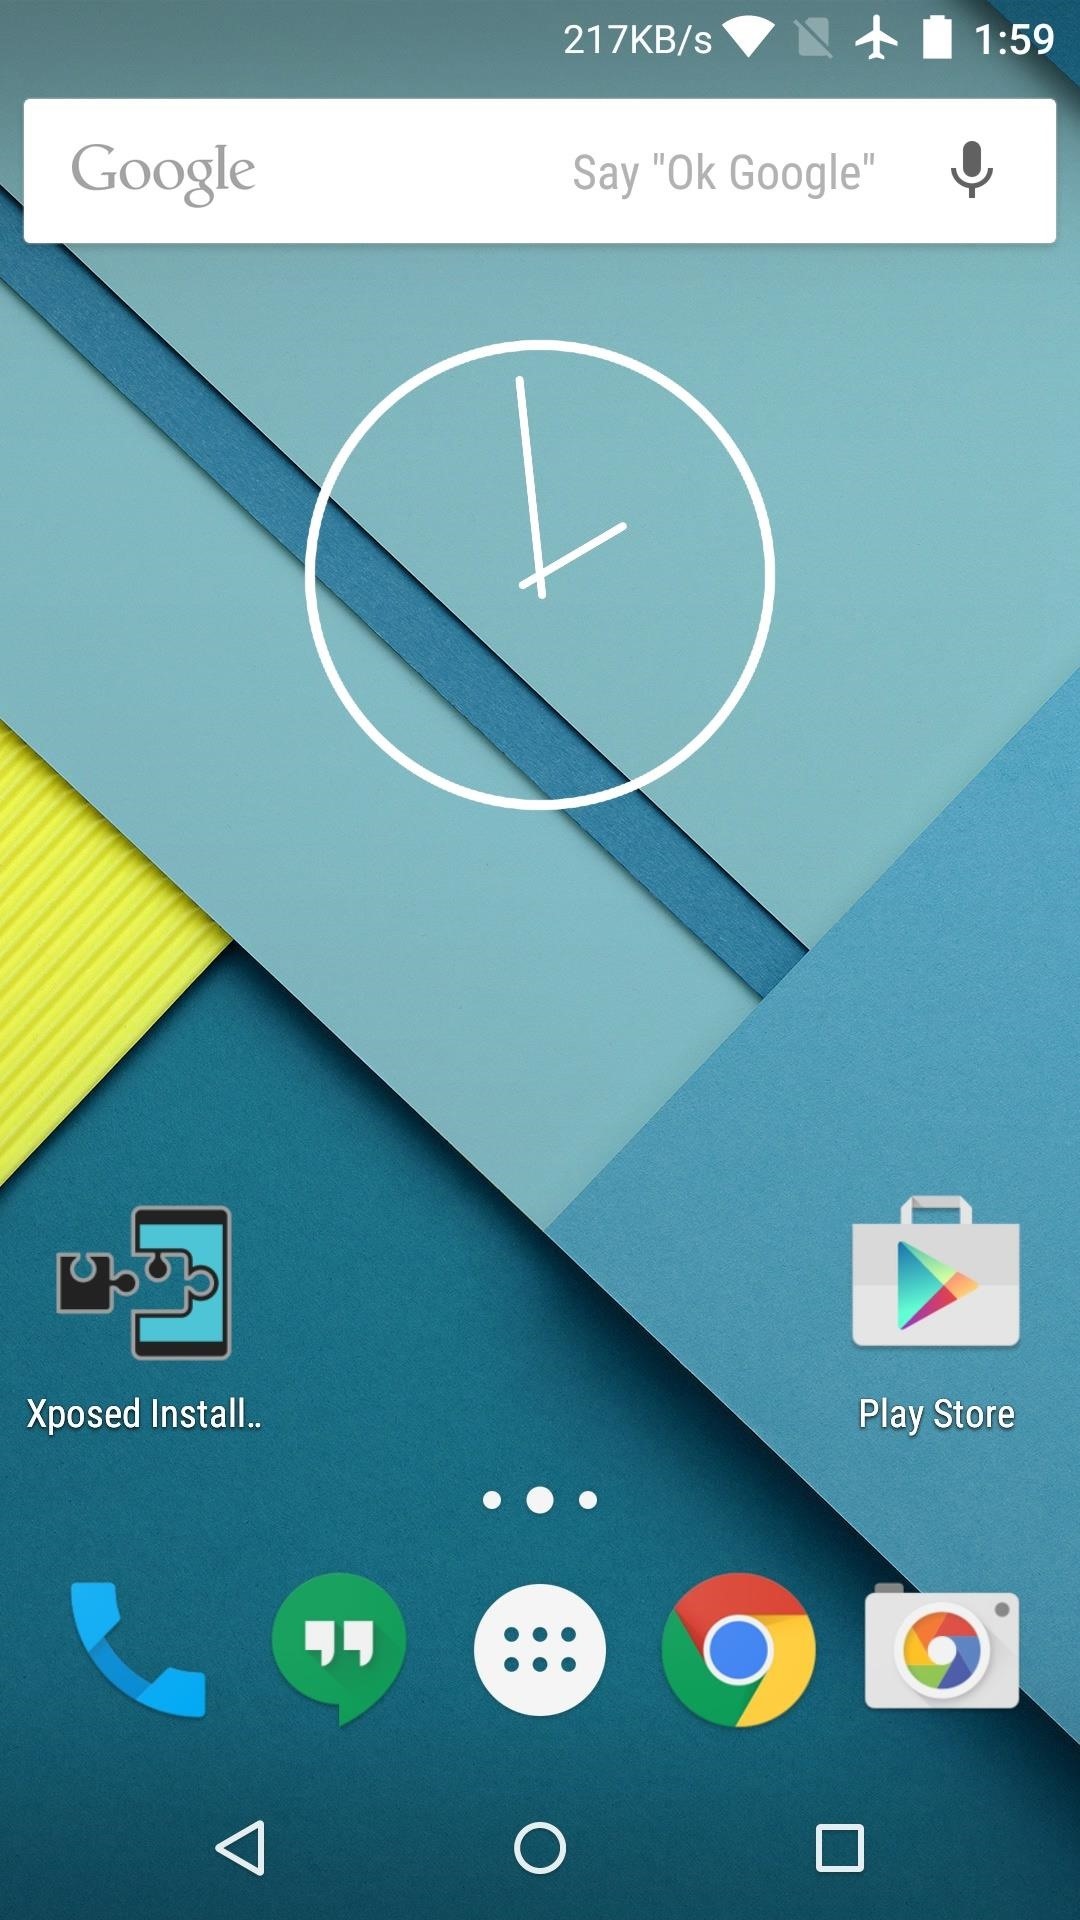 How to Add a Data Traffic Meter to Your Nexus 5's Status Bar